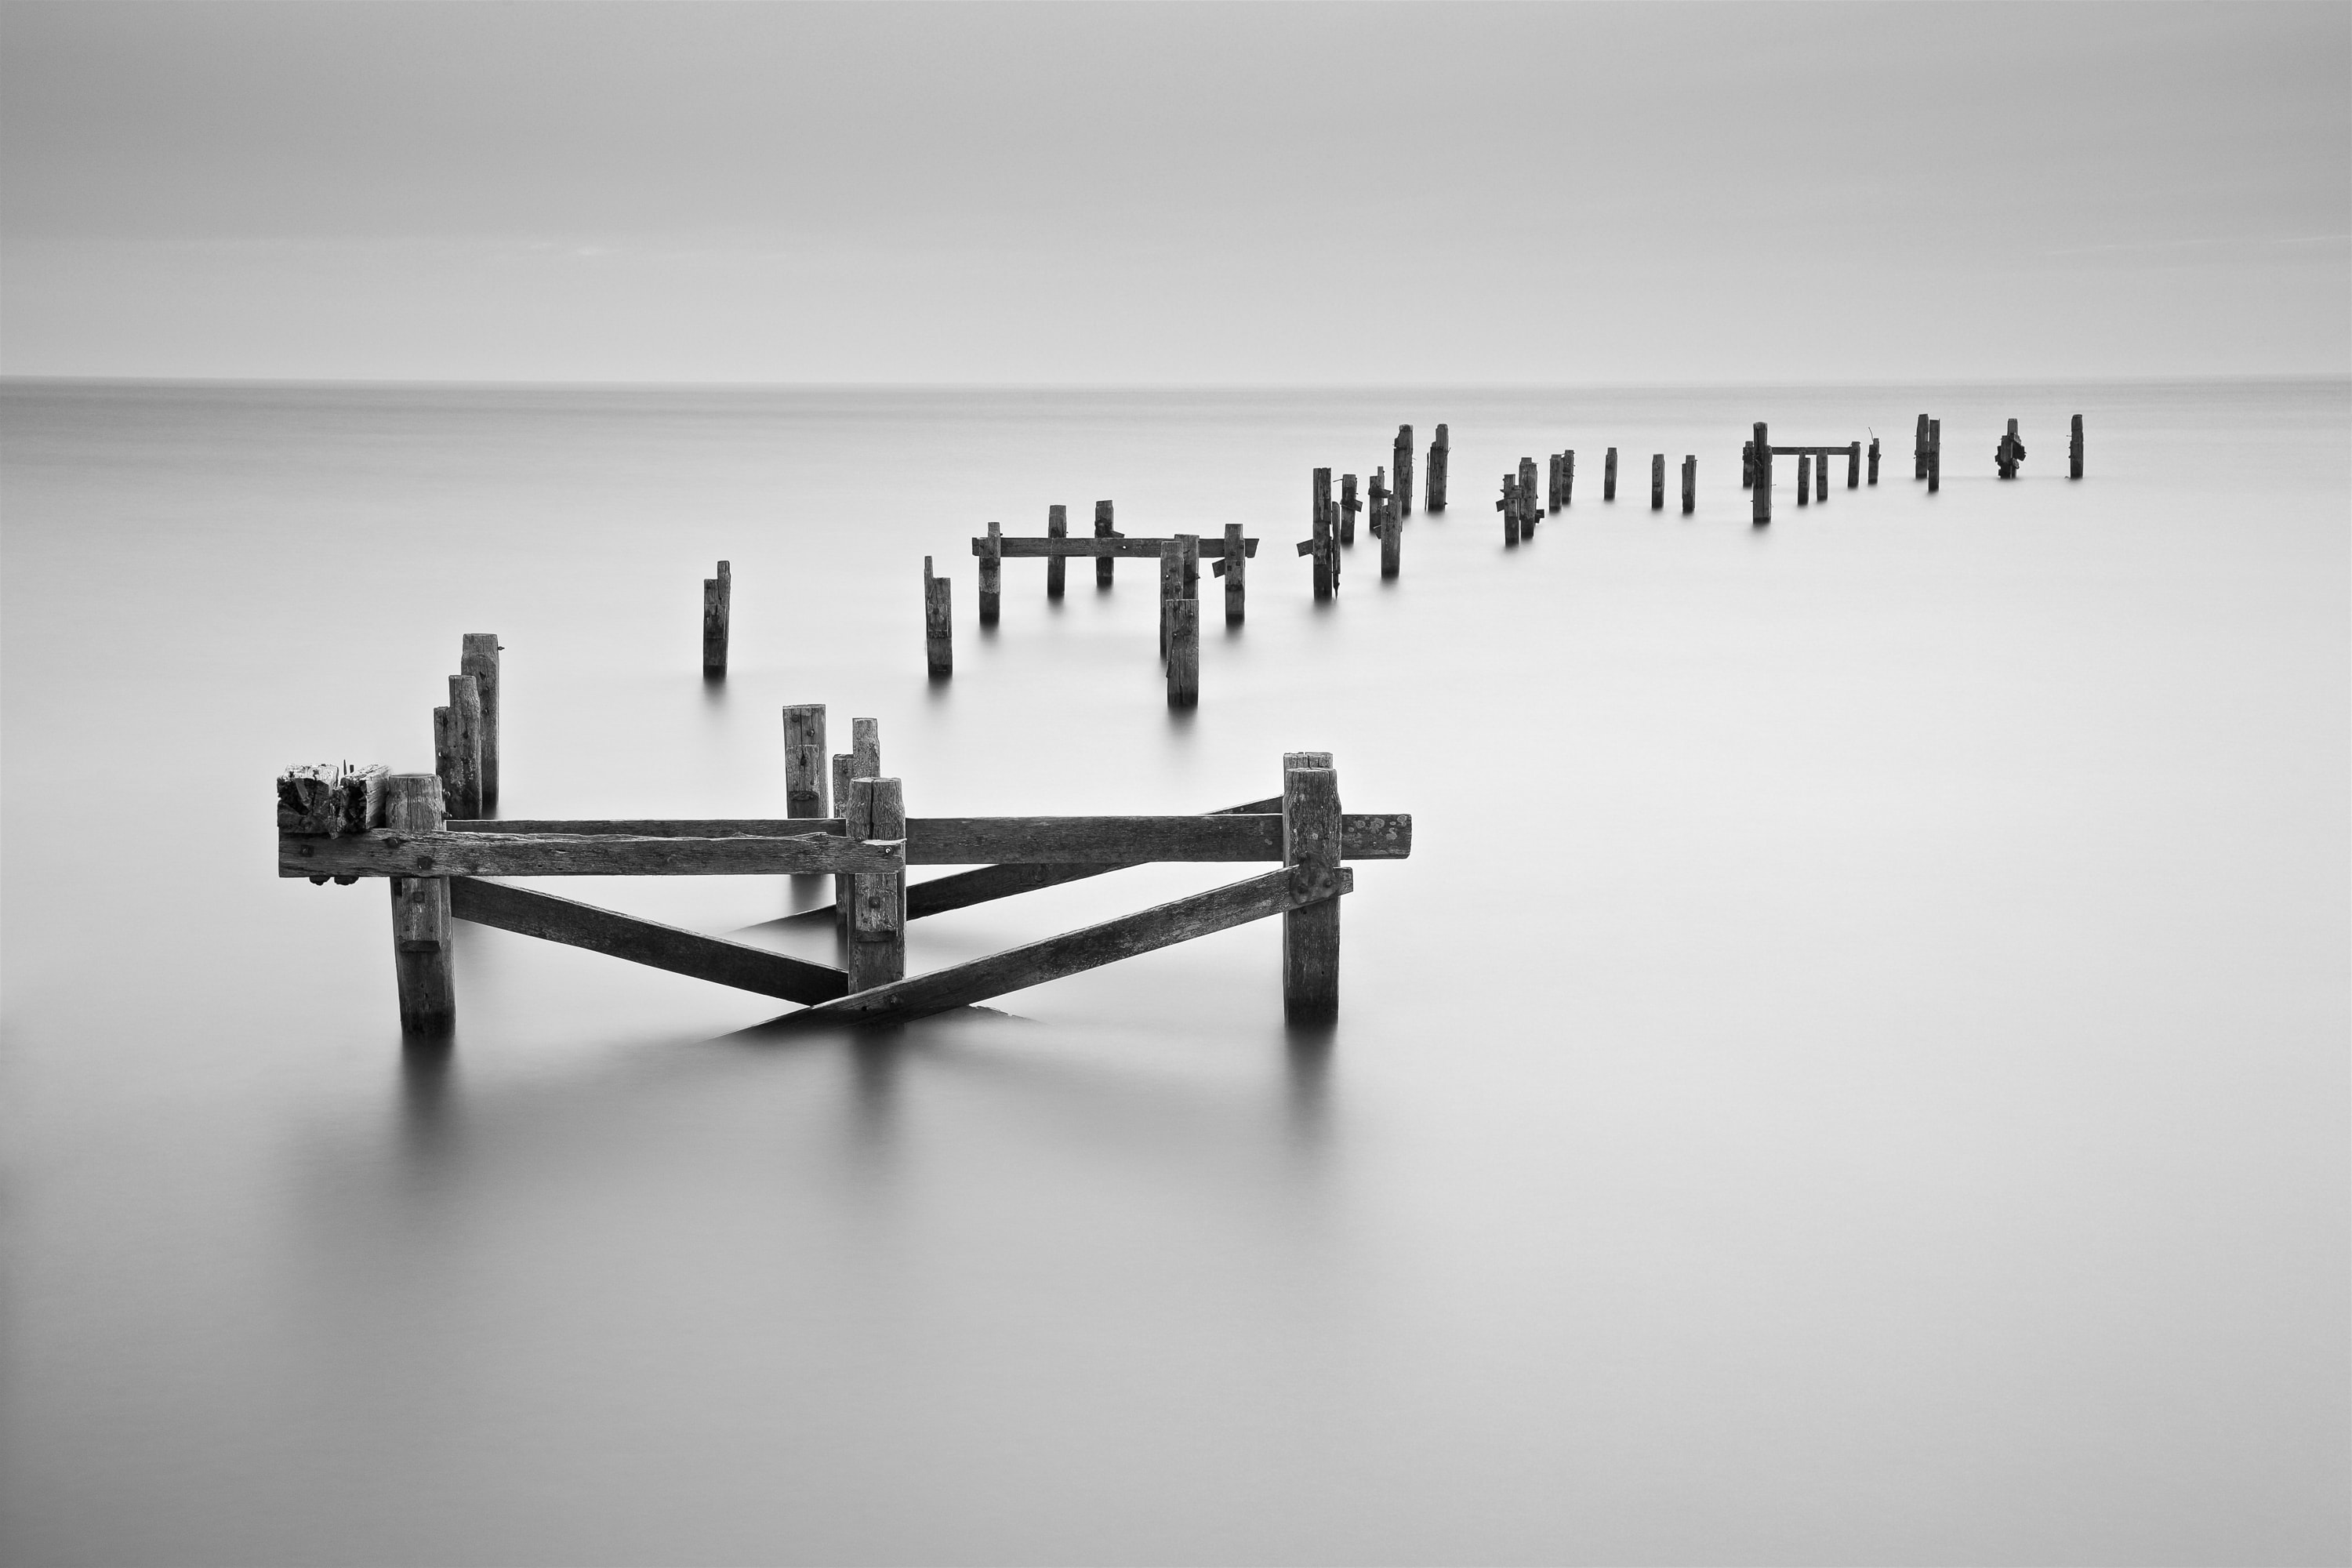 Long exposure photograph of Swanage Old Pier in Dorset.